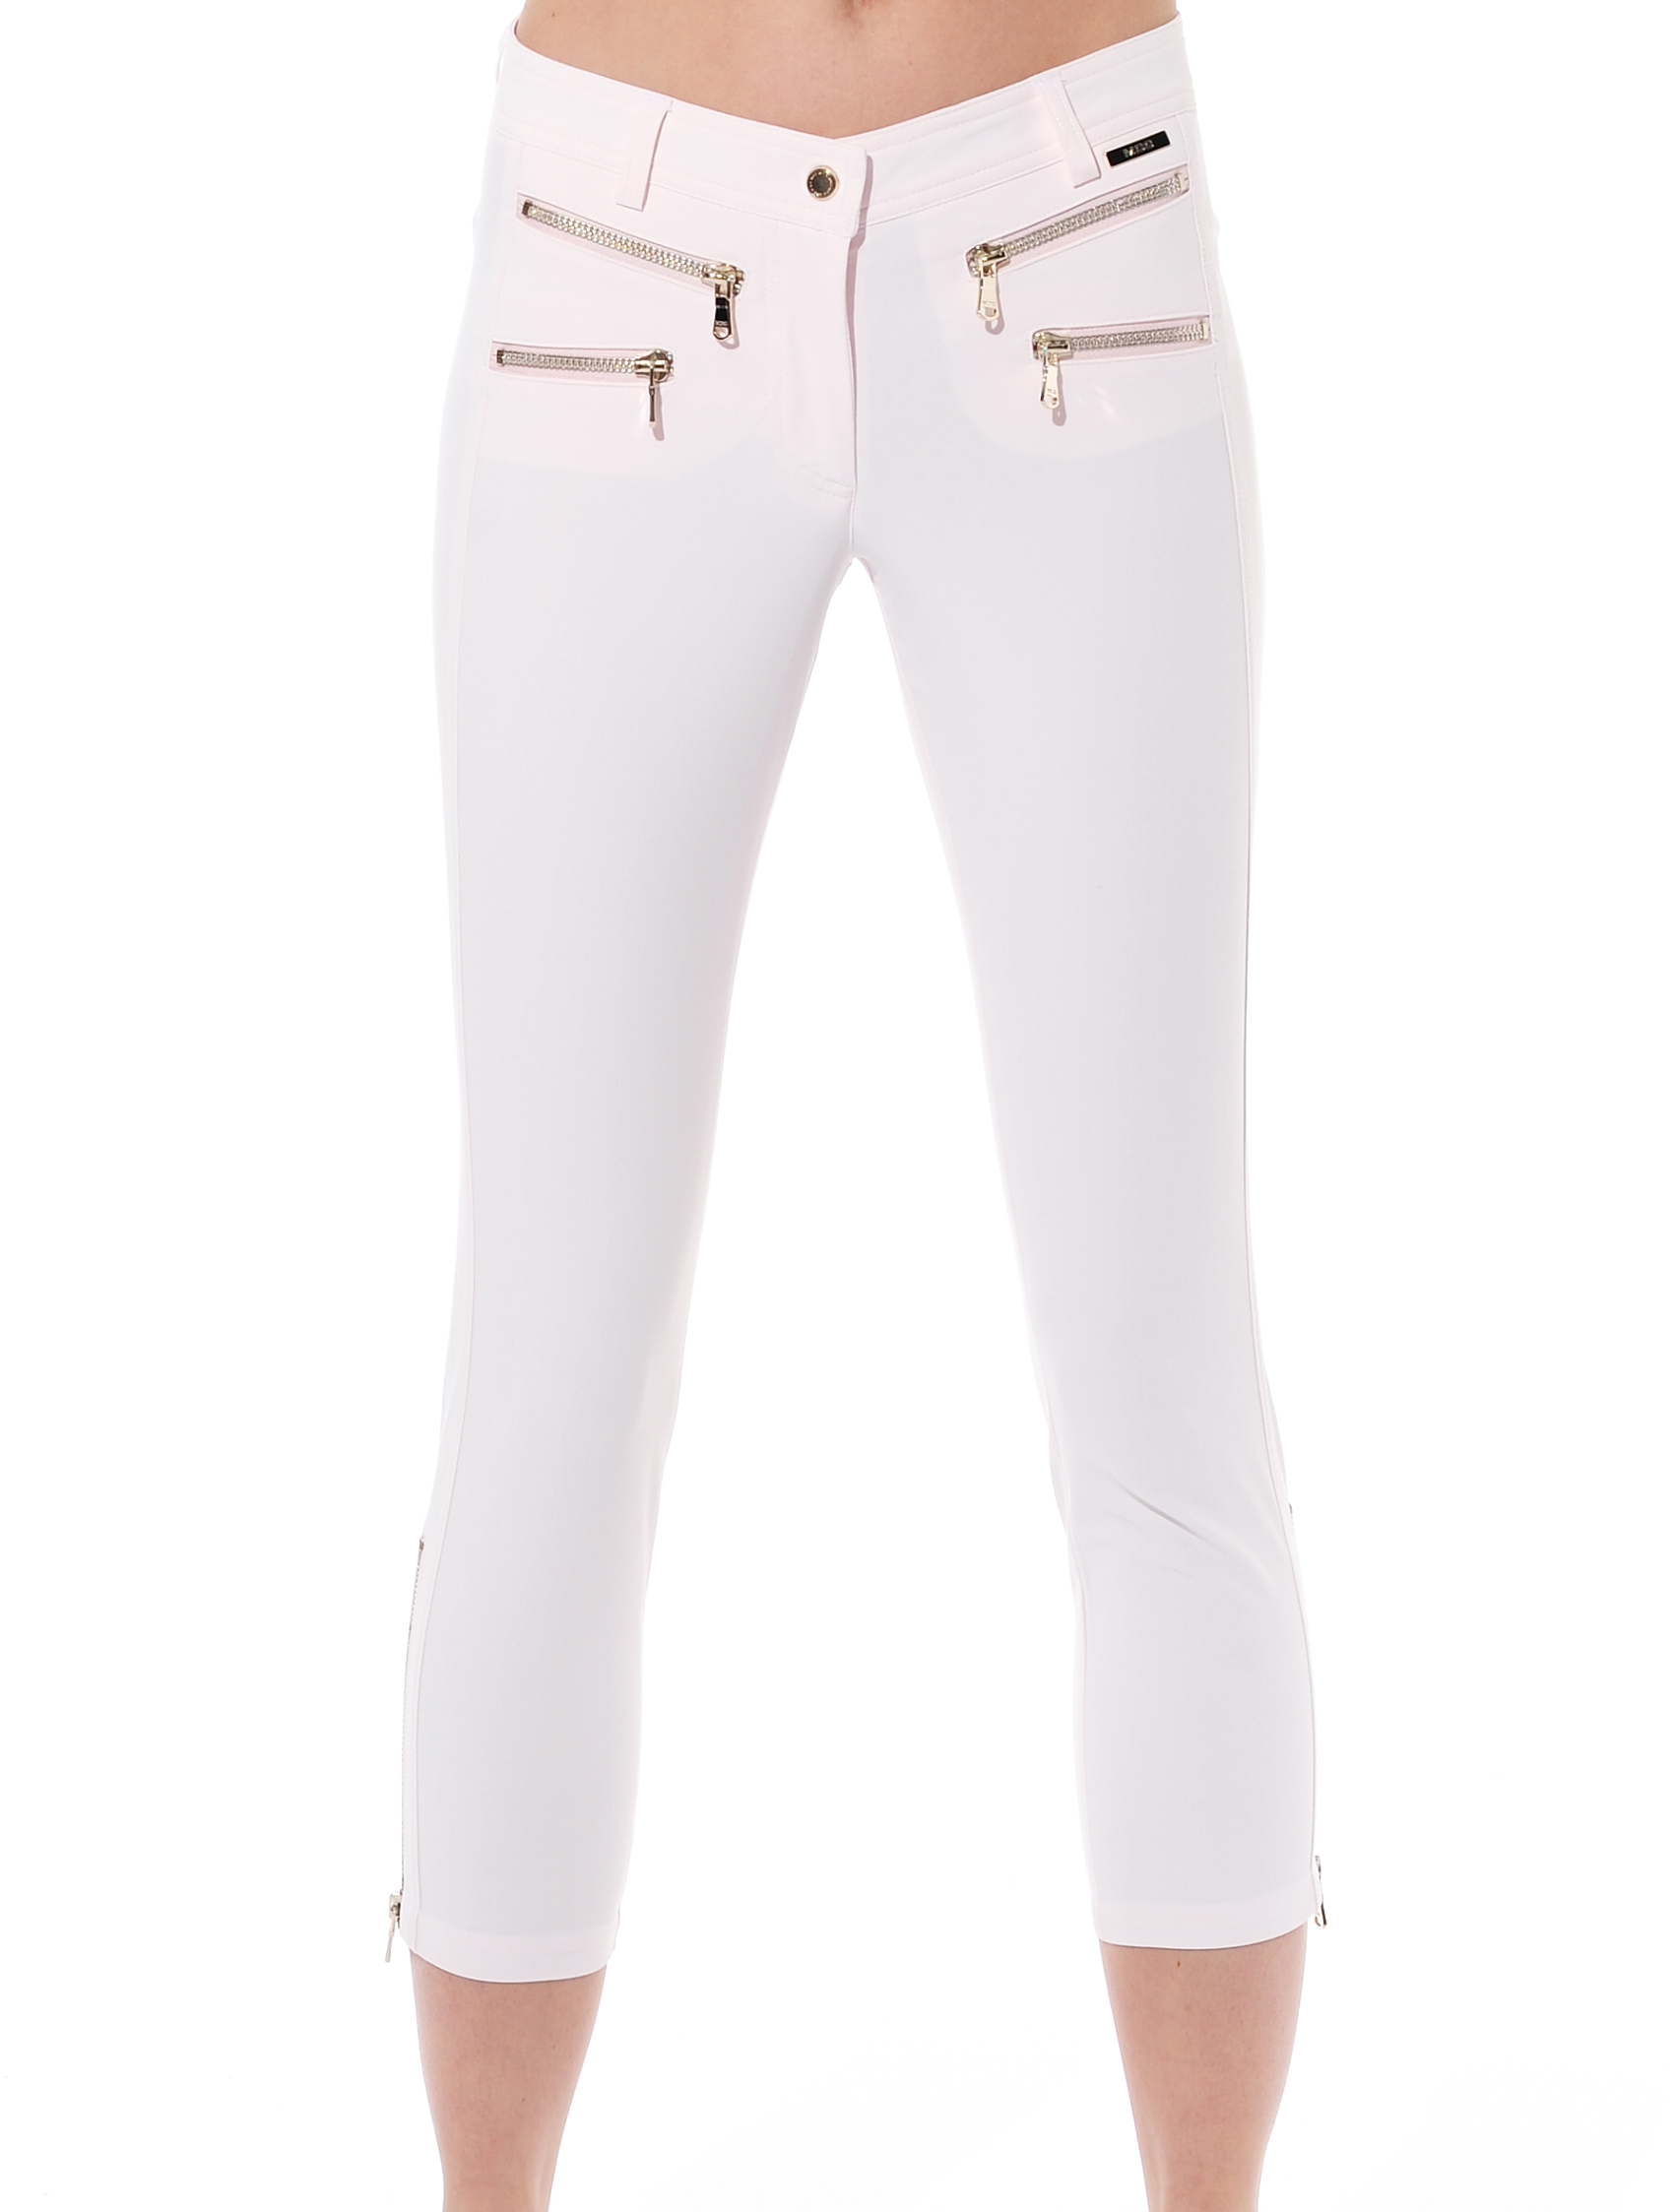 4way stretch double zip cropped pants nude 